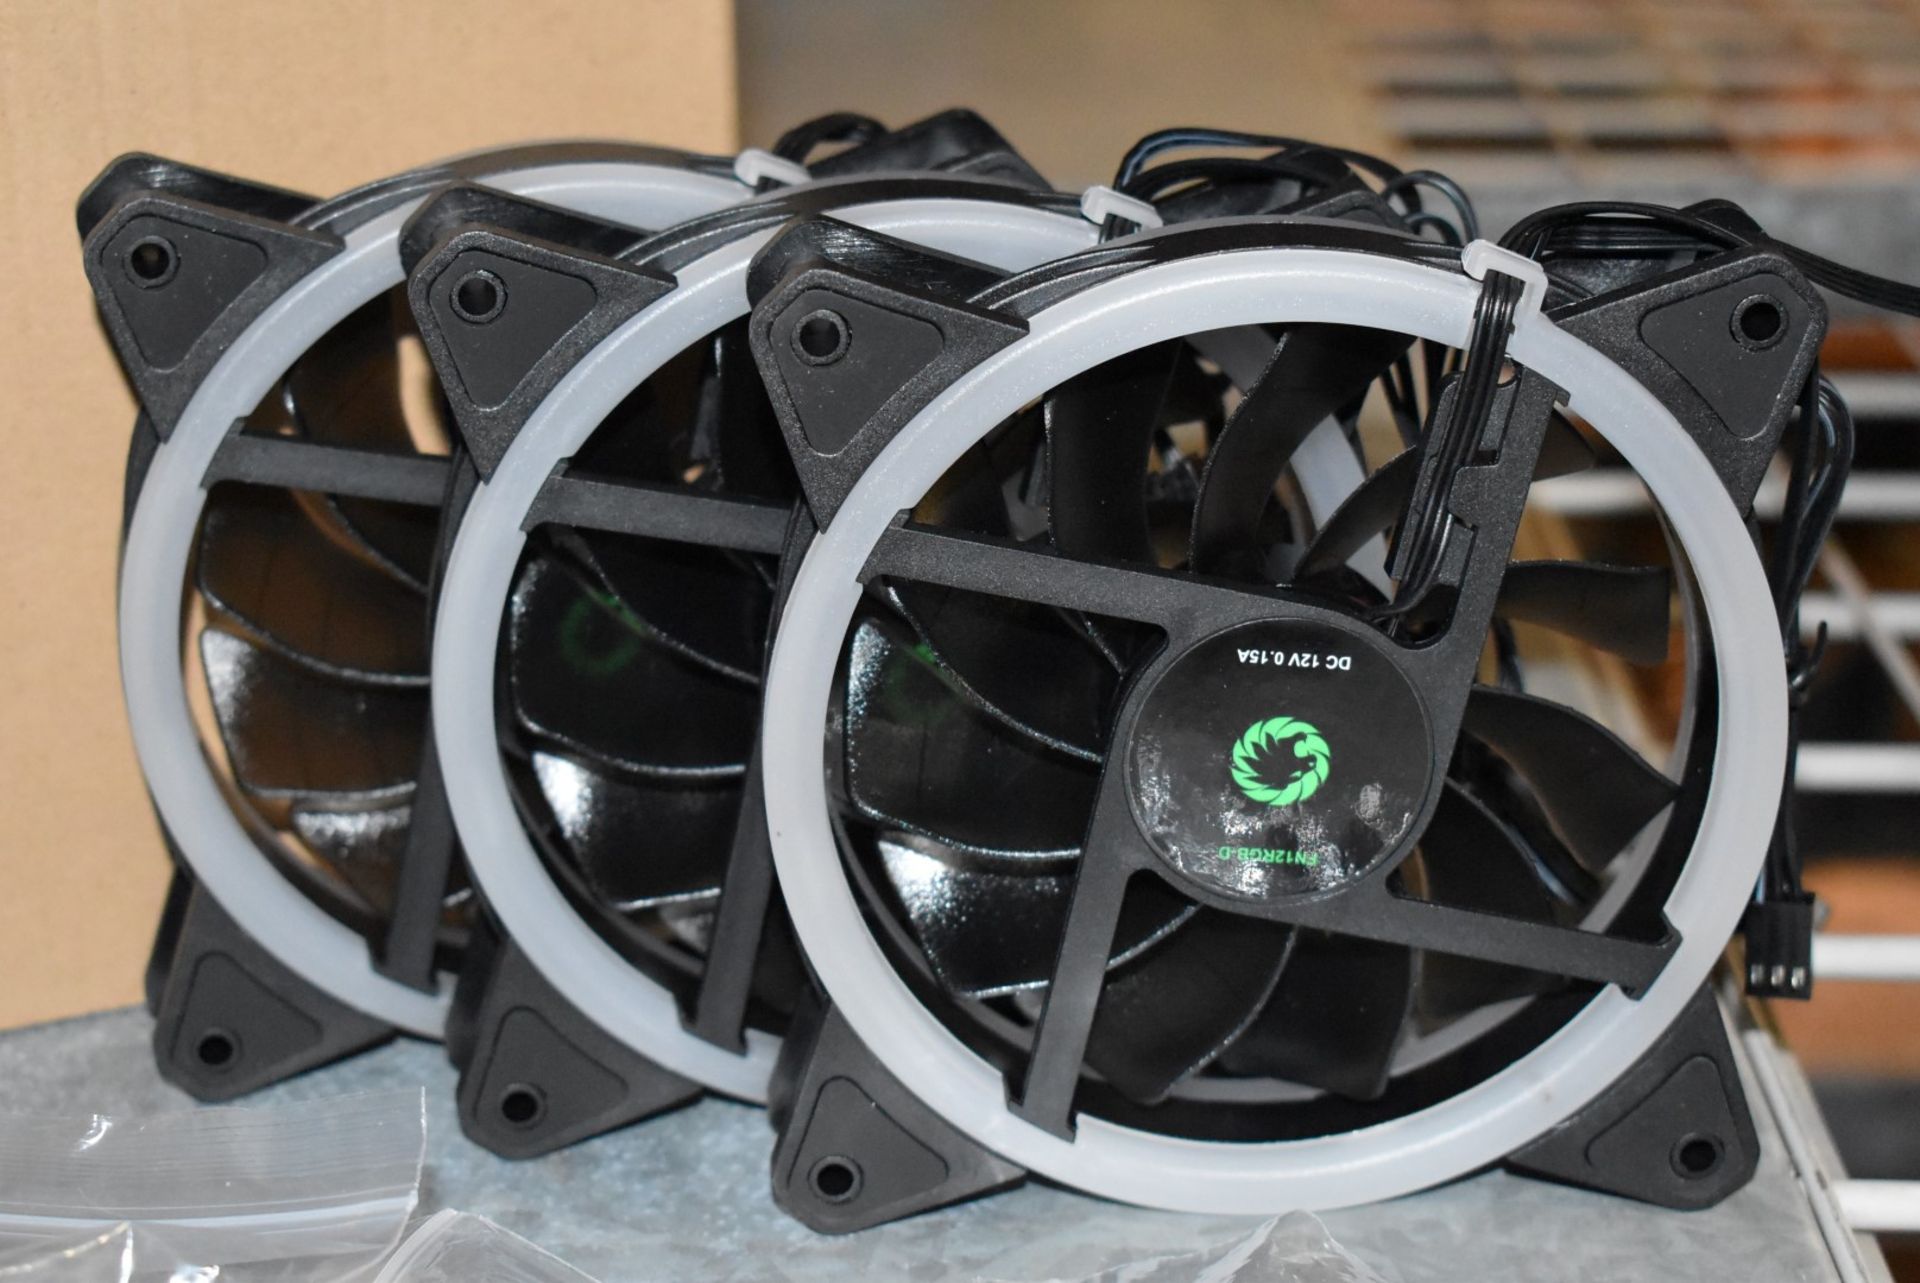 10 x GameMax LED Fan Packs For PC Gaming Cases - Each Packs Include 3 x 120mm LED Case Fans, - Image 2 of 8